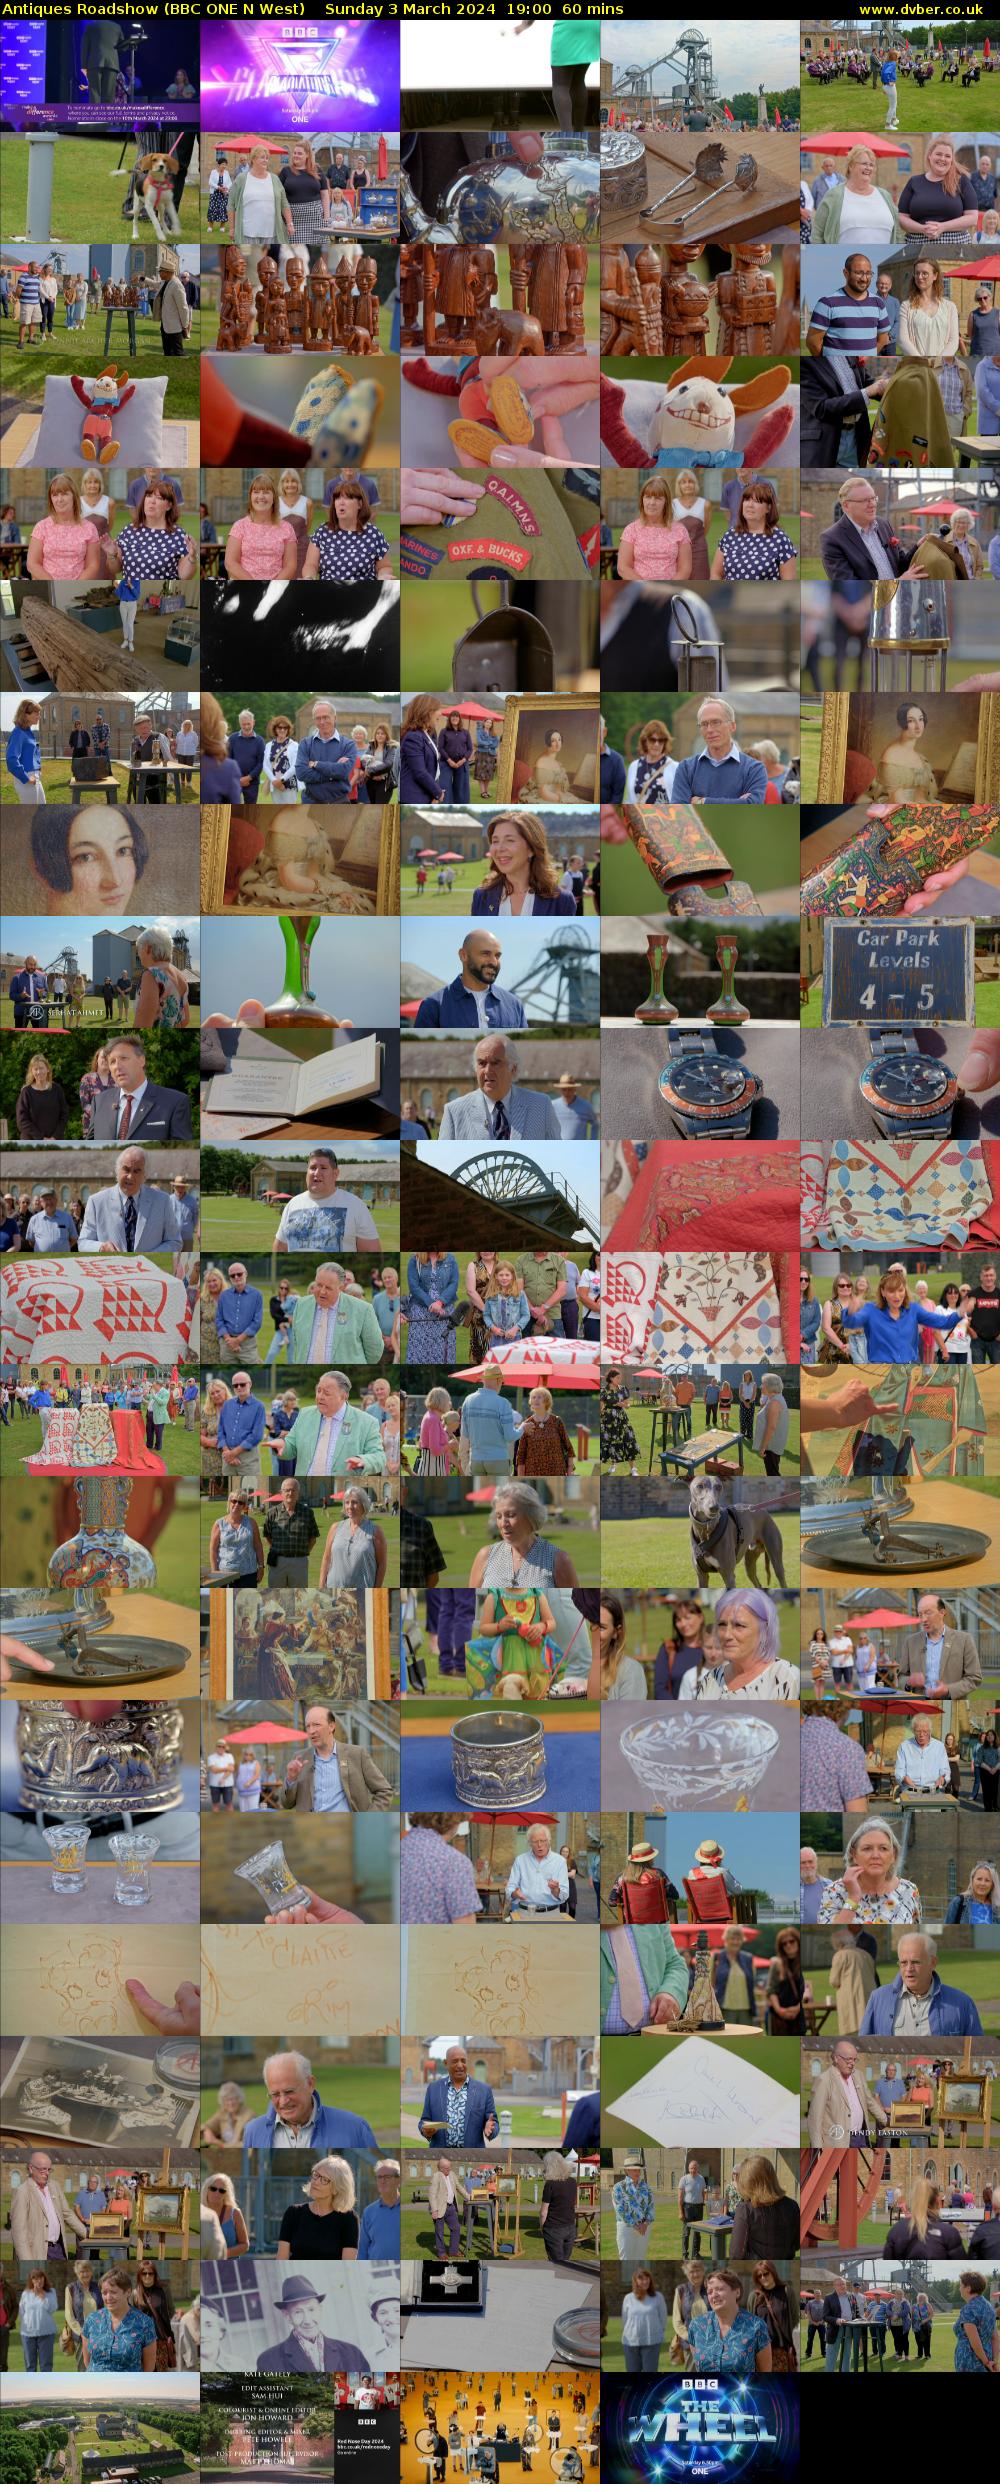 Antiques Roadshow (BBC ONE N West) Sunday 3 March 2024 19:00 - 20:00